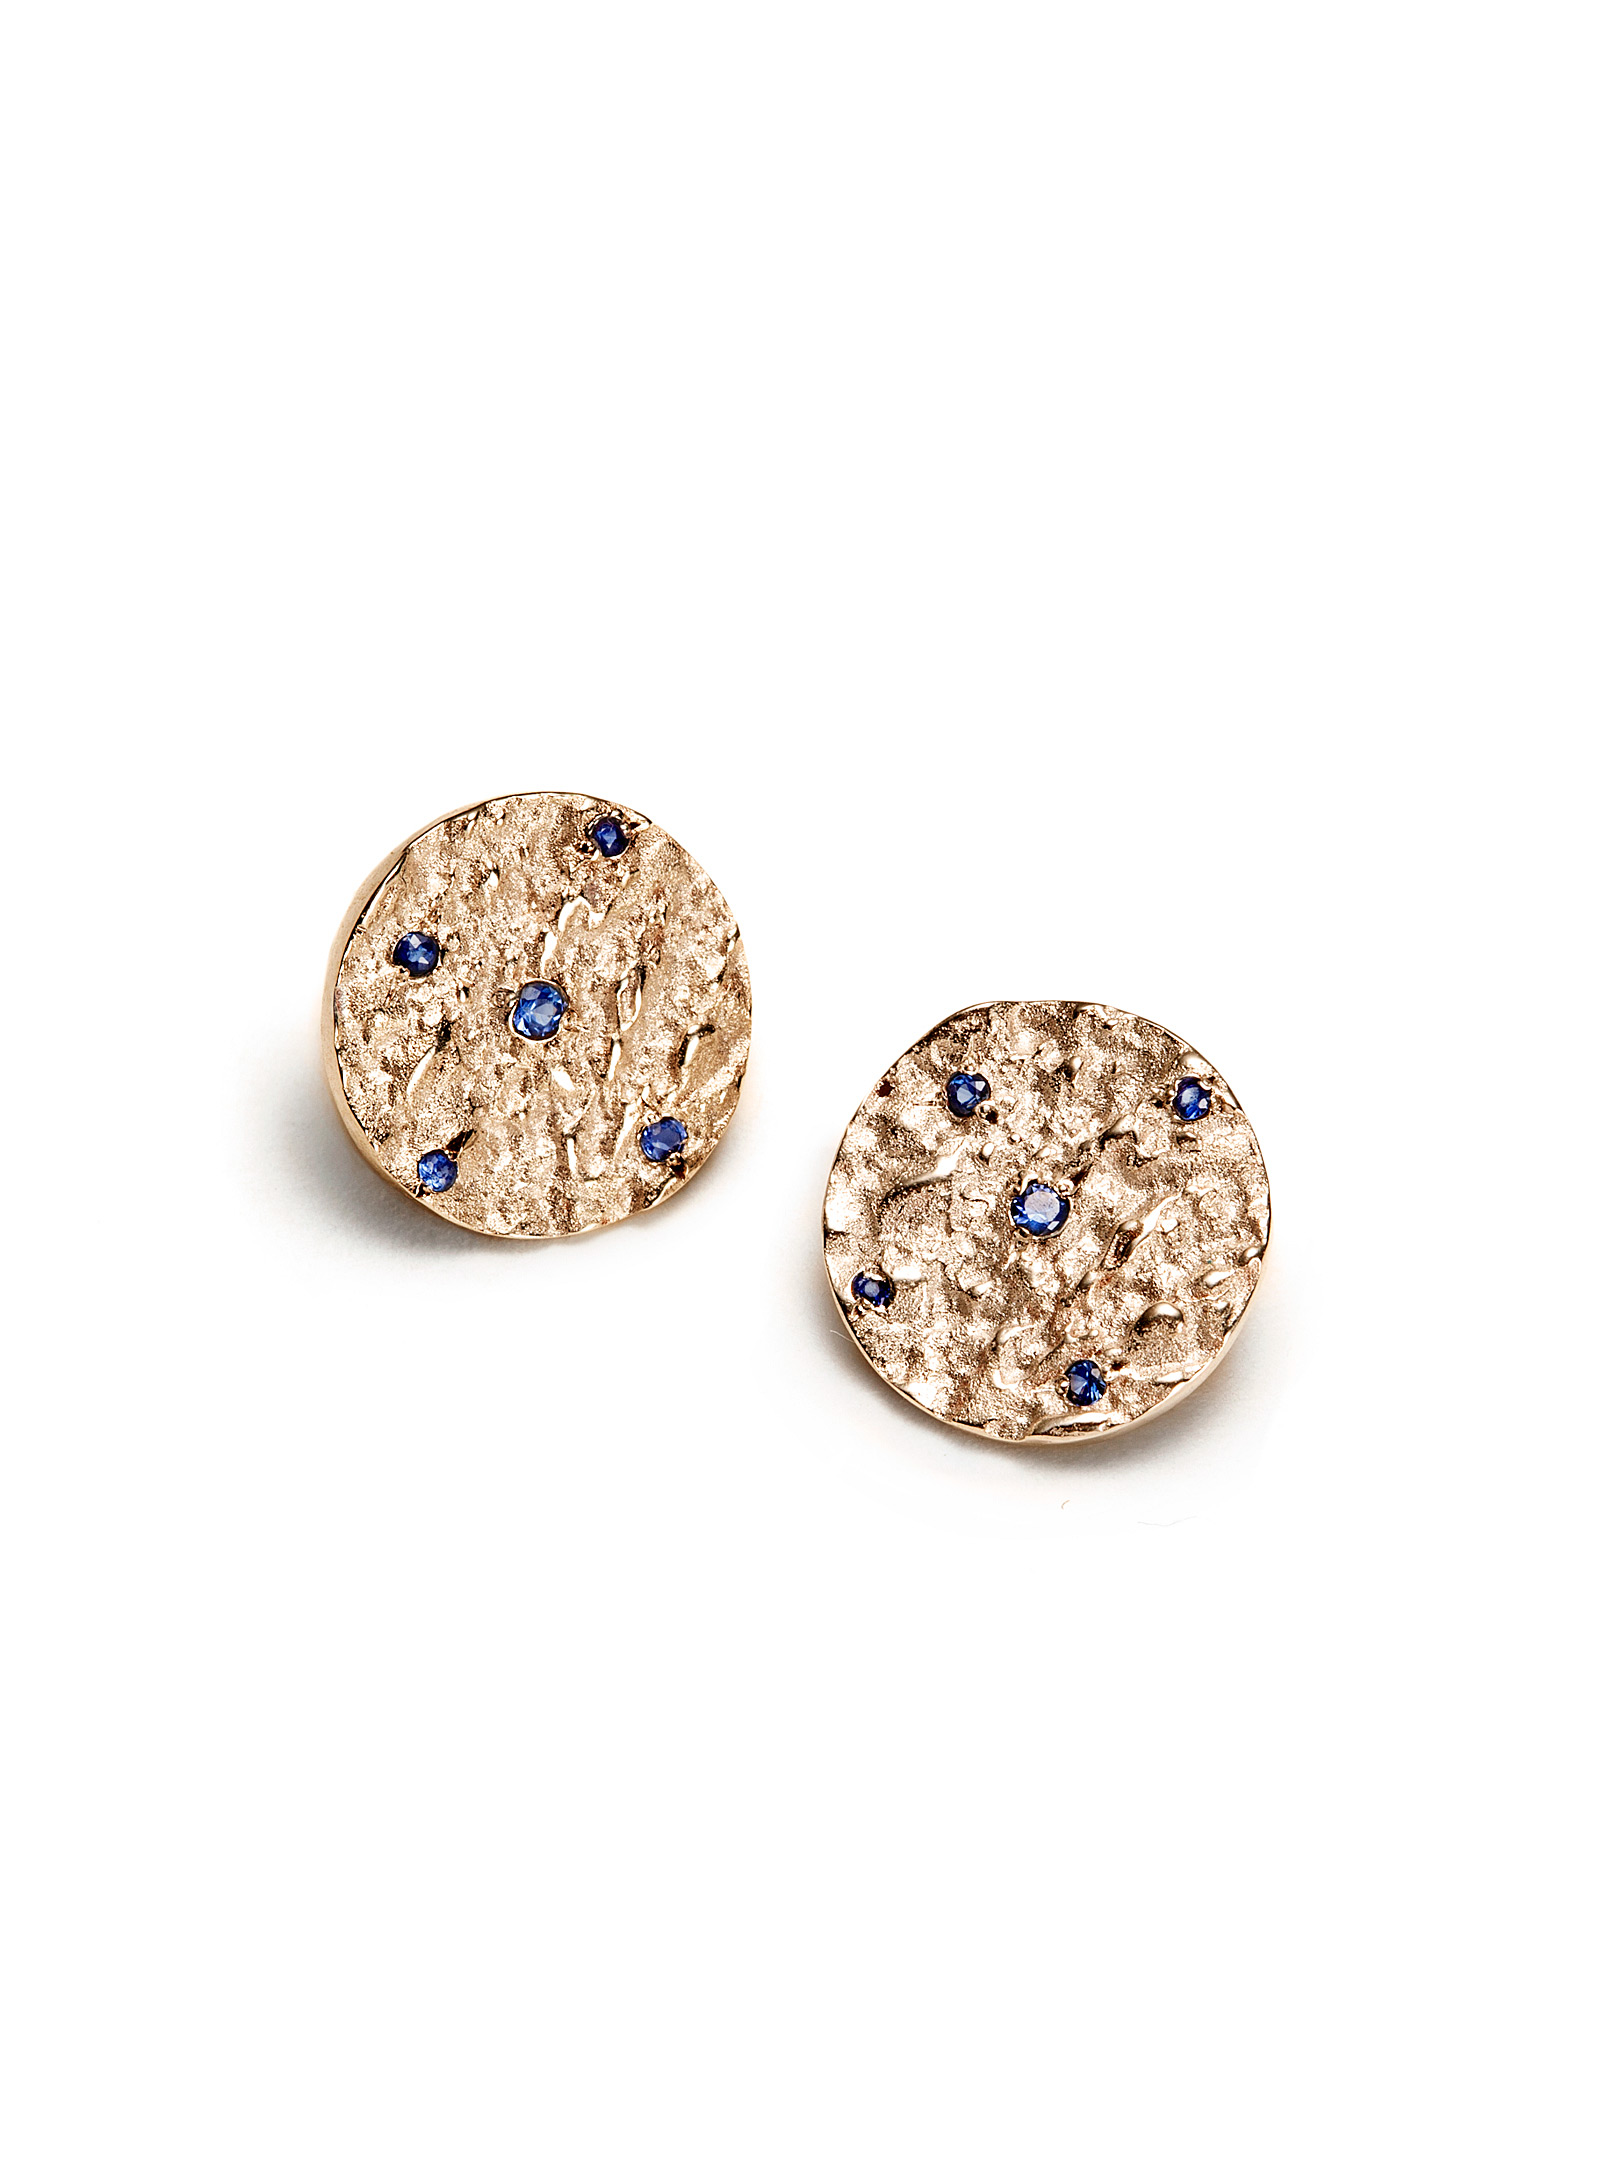 Atelier LAF - Mineral and sapphire medallion gold earrings